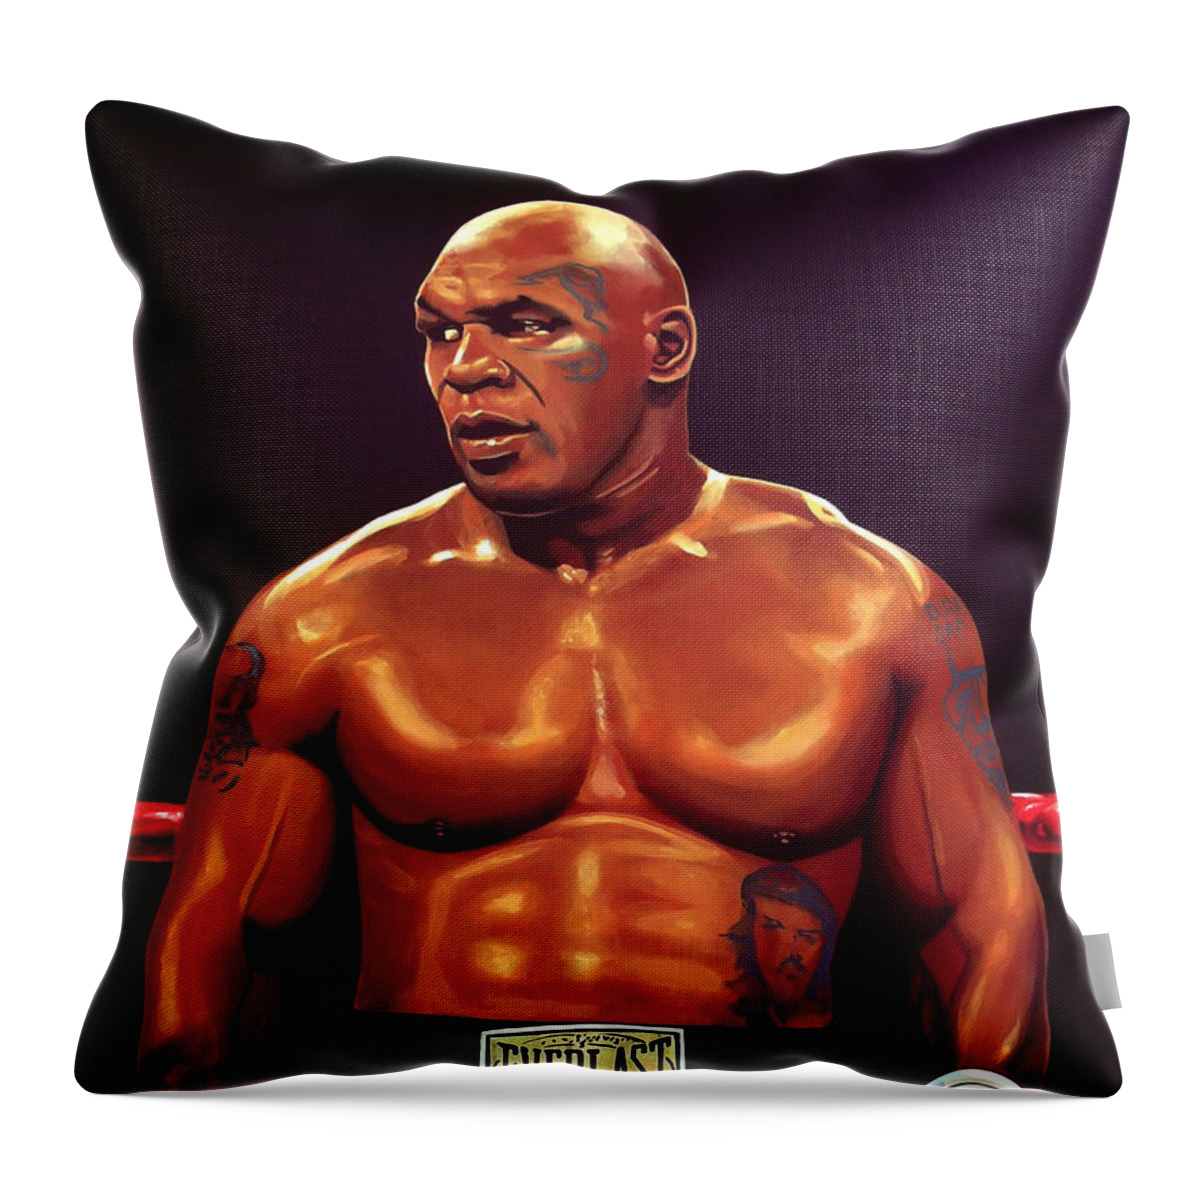 Mike Tyson Throw Pillow featuring the painting Mike Tyson by Paul Meijering